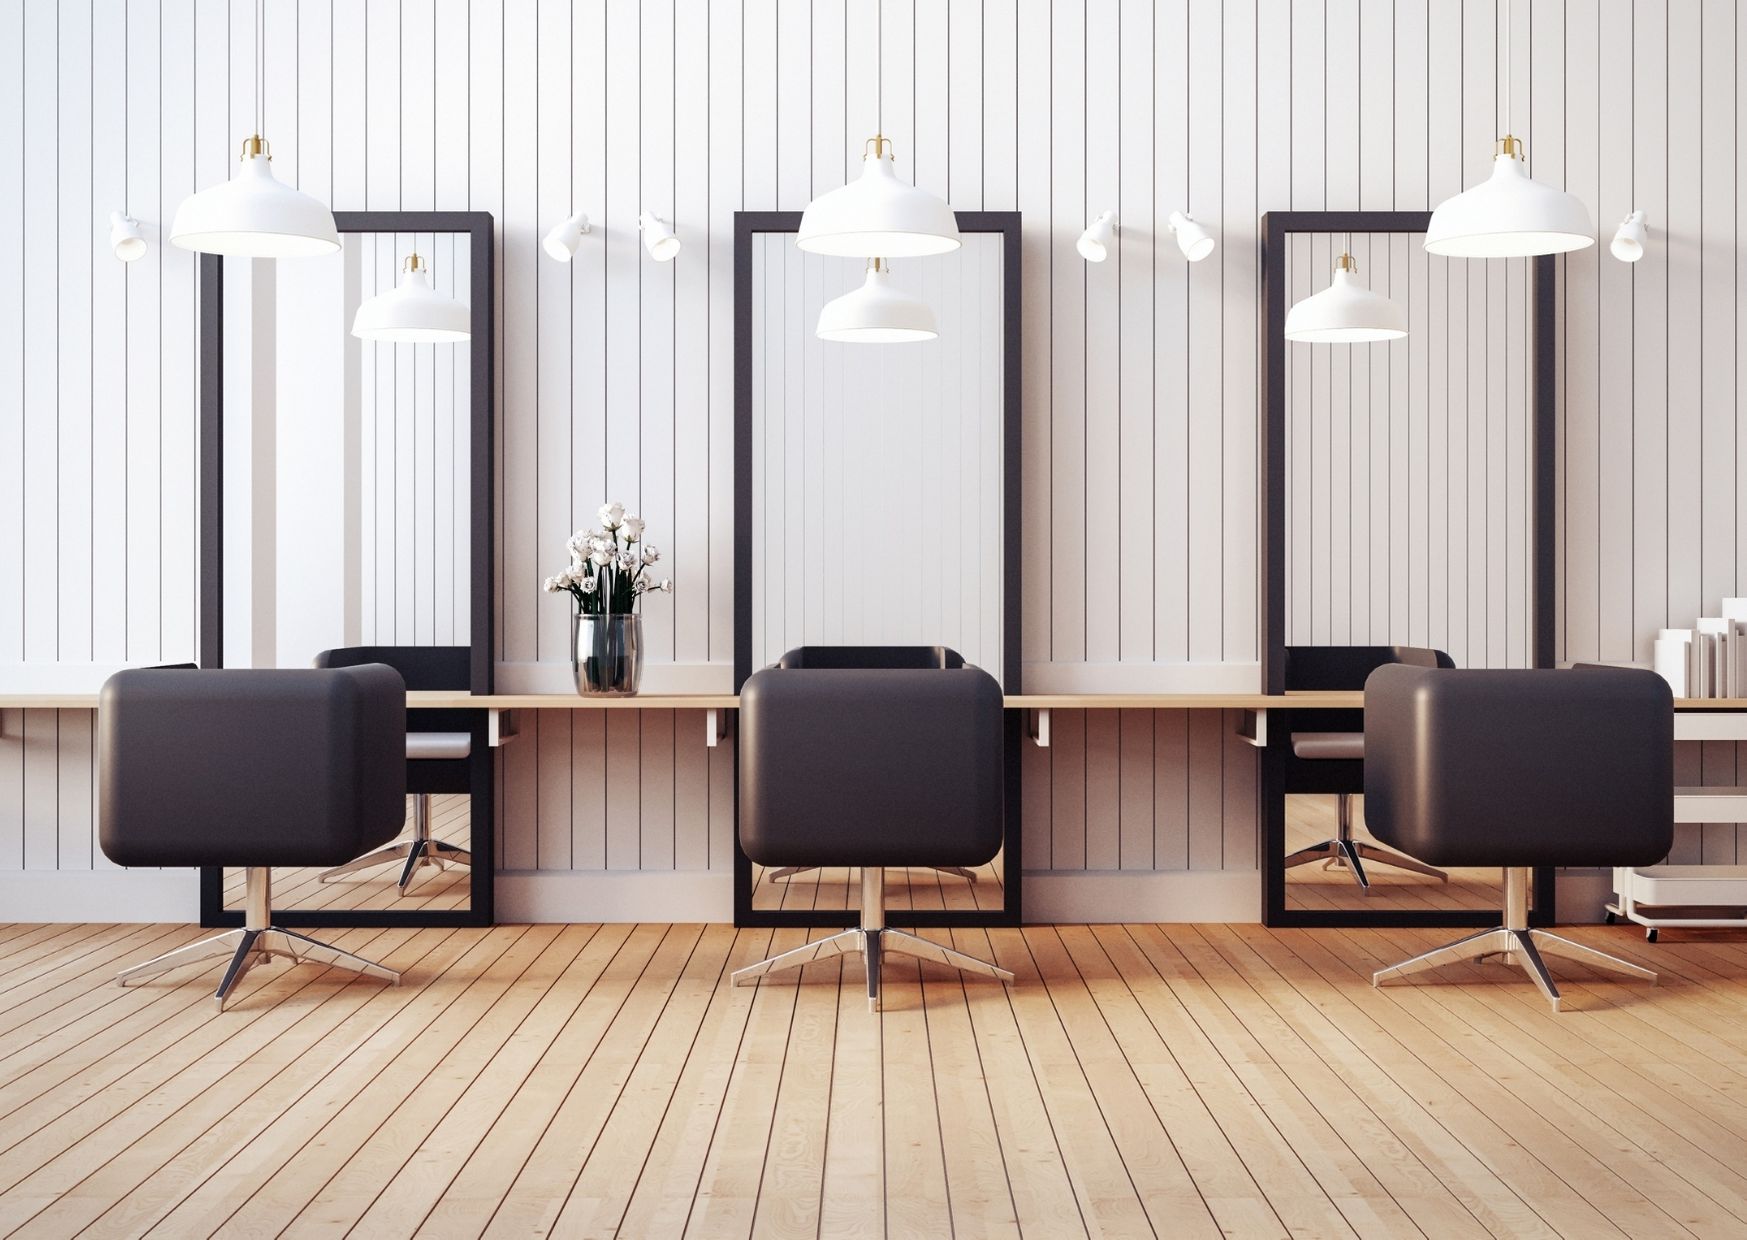 The 5 Ways to Grow Your Salon: How to Increase Your Profits by 28% - Beauty  Business Secrets